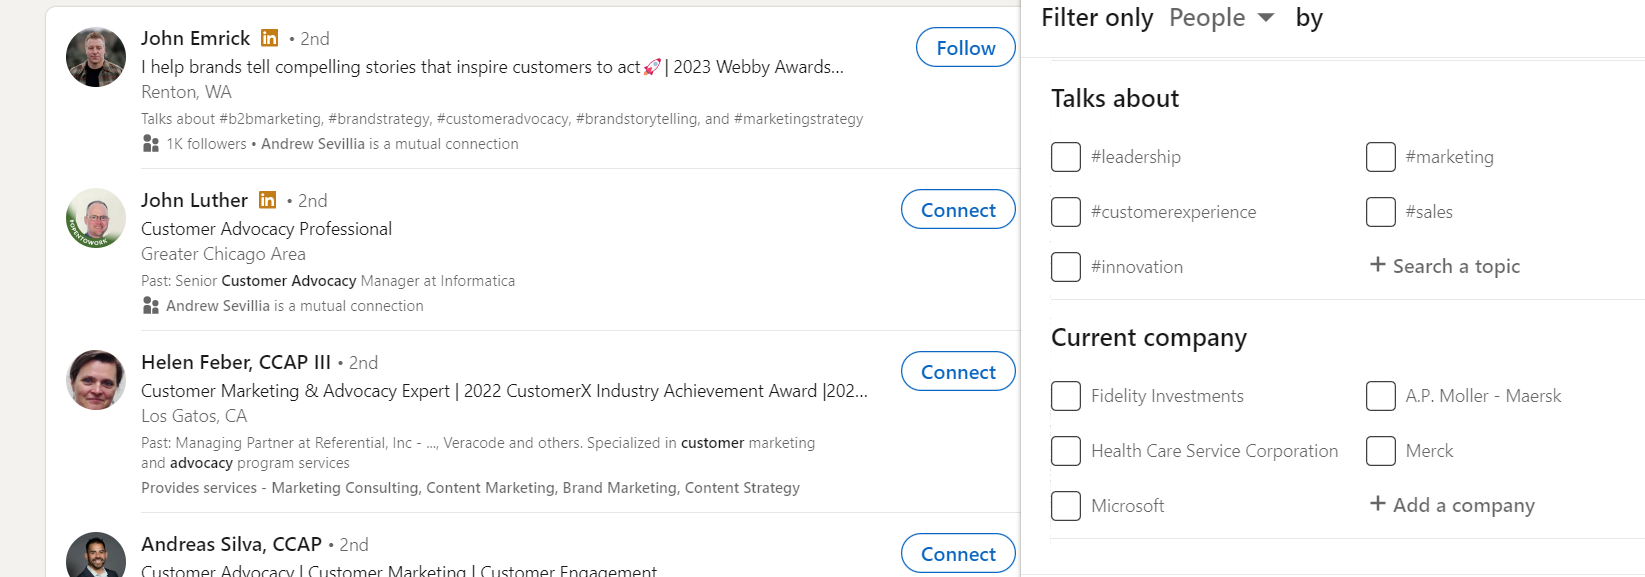 LinkedIn may provide thousands of subject experts for a given topic. Refine results by using built-in filters, like these.